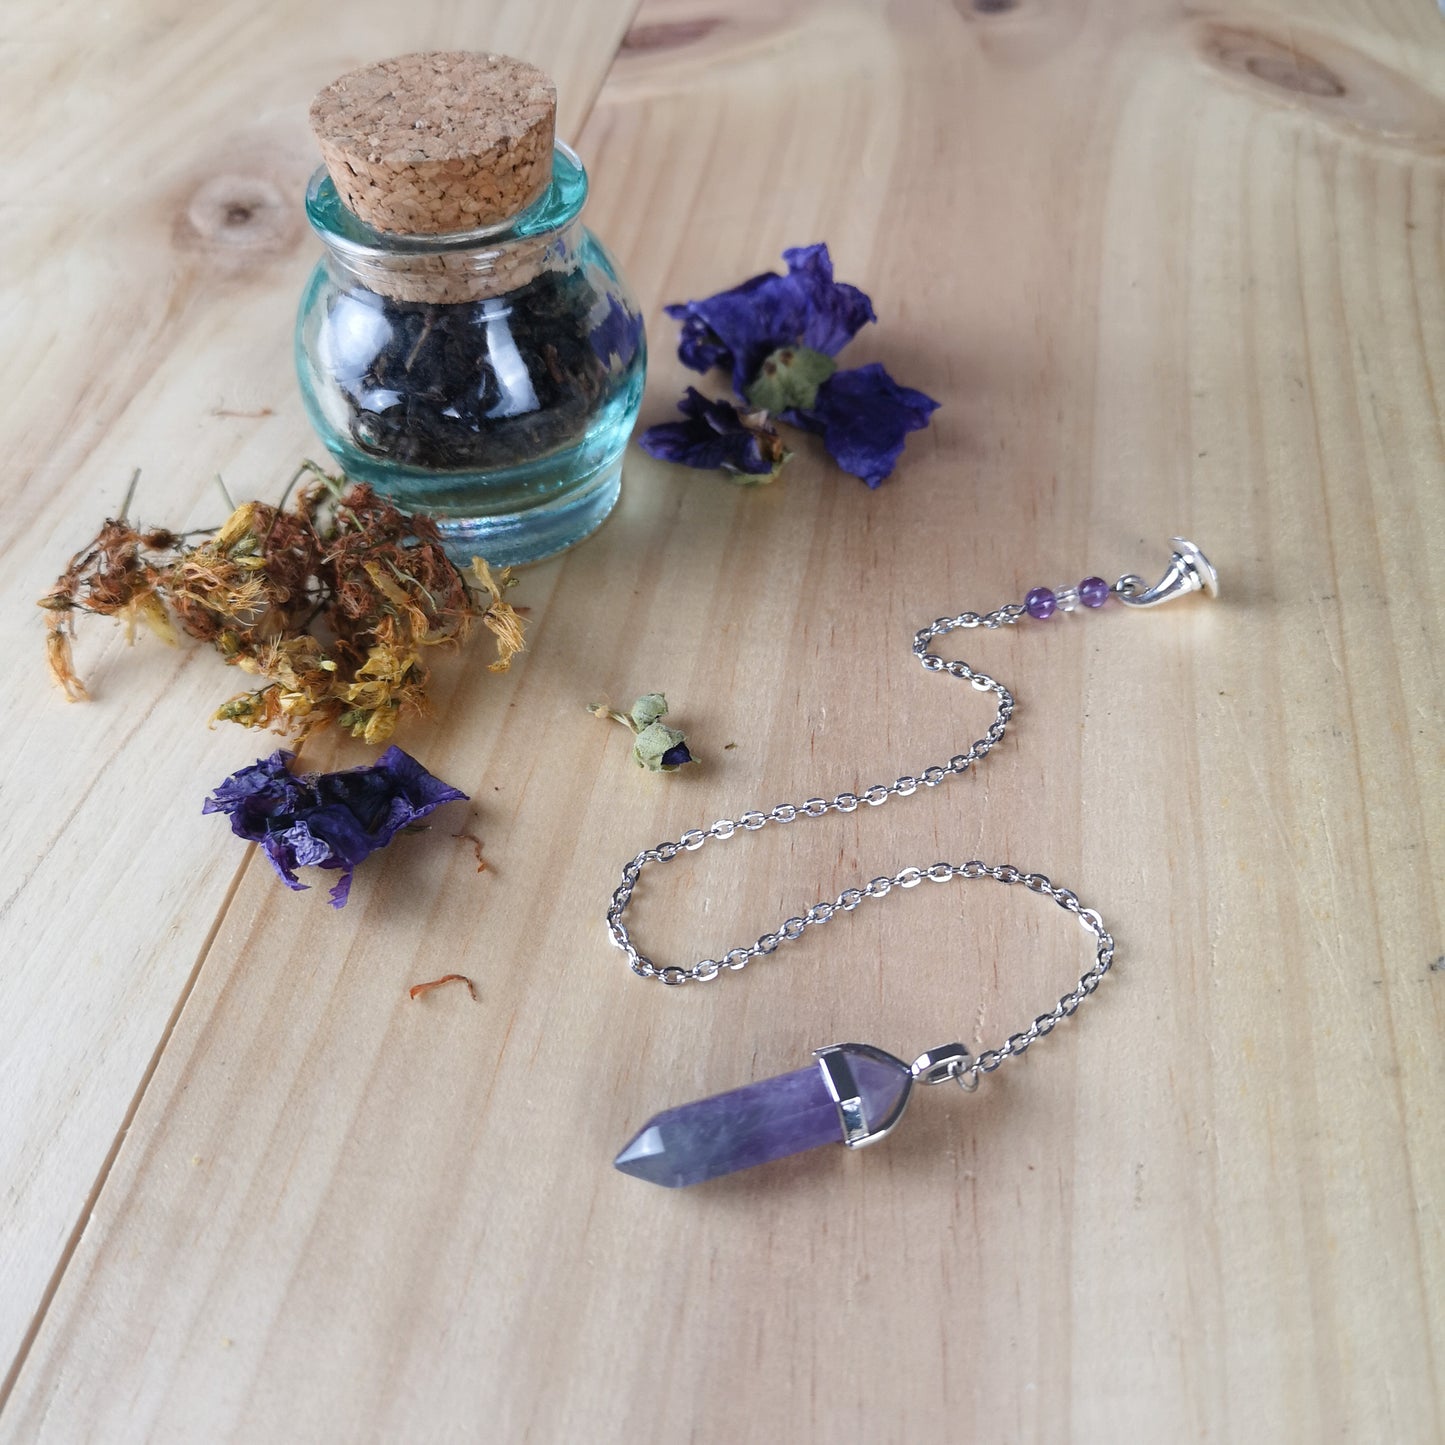 Amethyst and witch pointy hat dowsing divination pendulum Baguette Magick